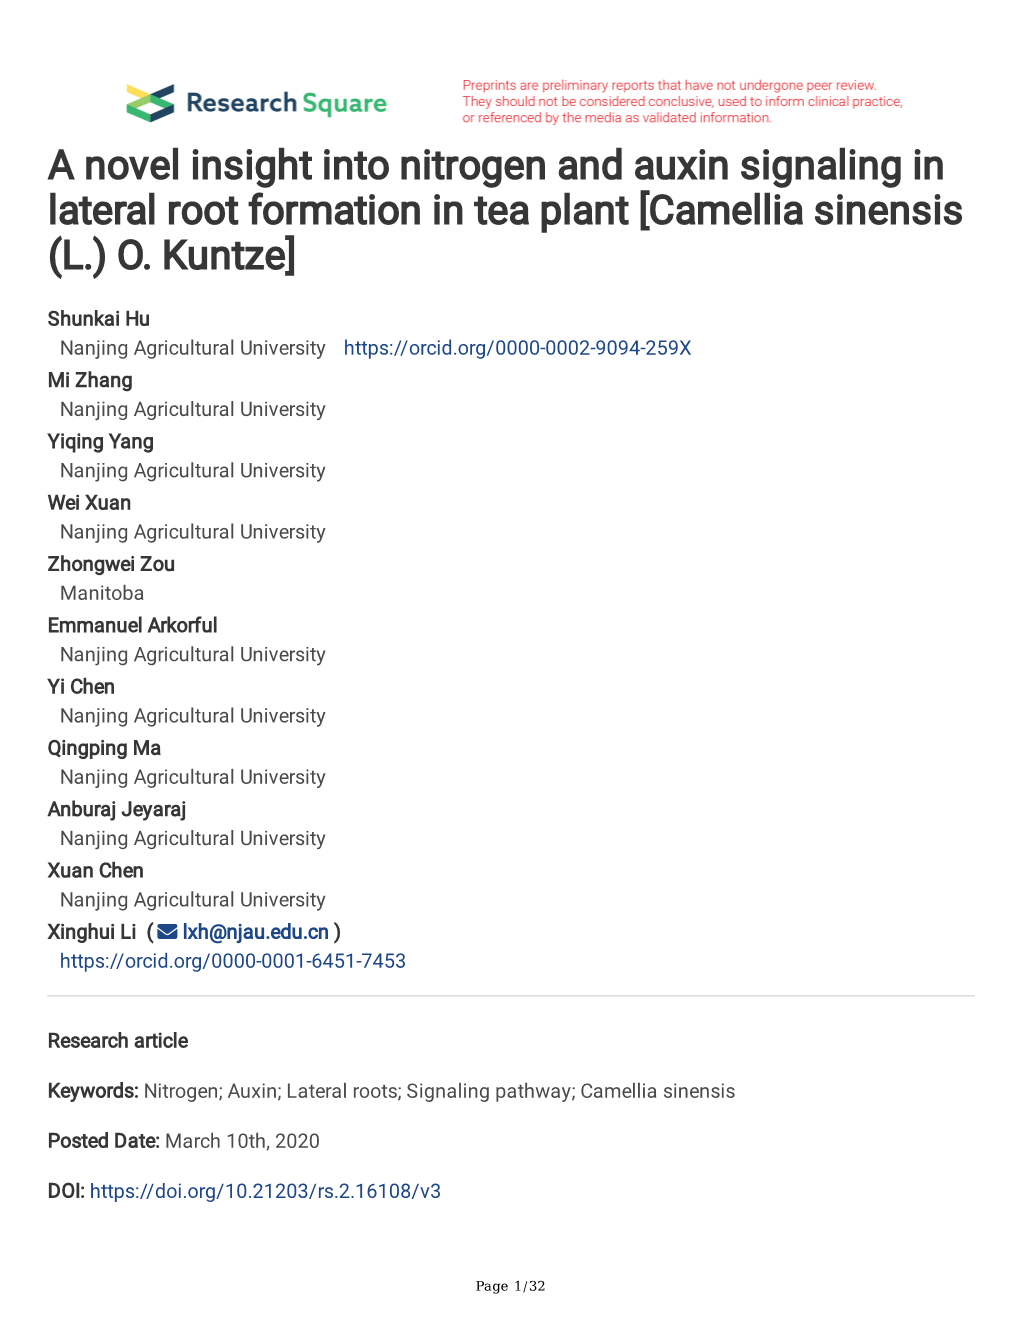 A Novel Insight Into Nitrogen and Auxin Signaling in Lateral Root Formation in Tea Plant [Camellia Sinensis (L.) O